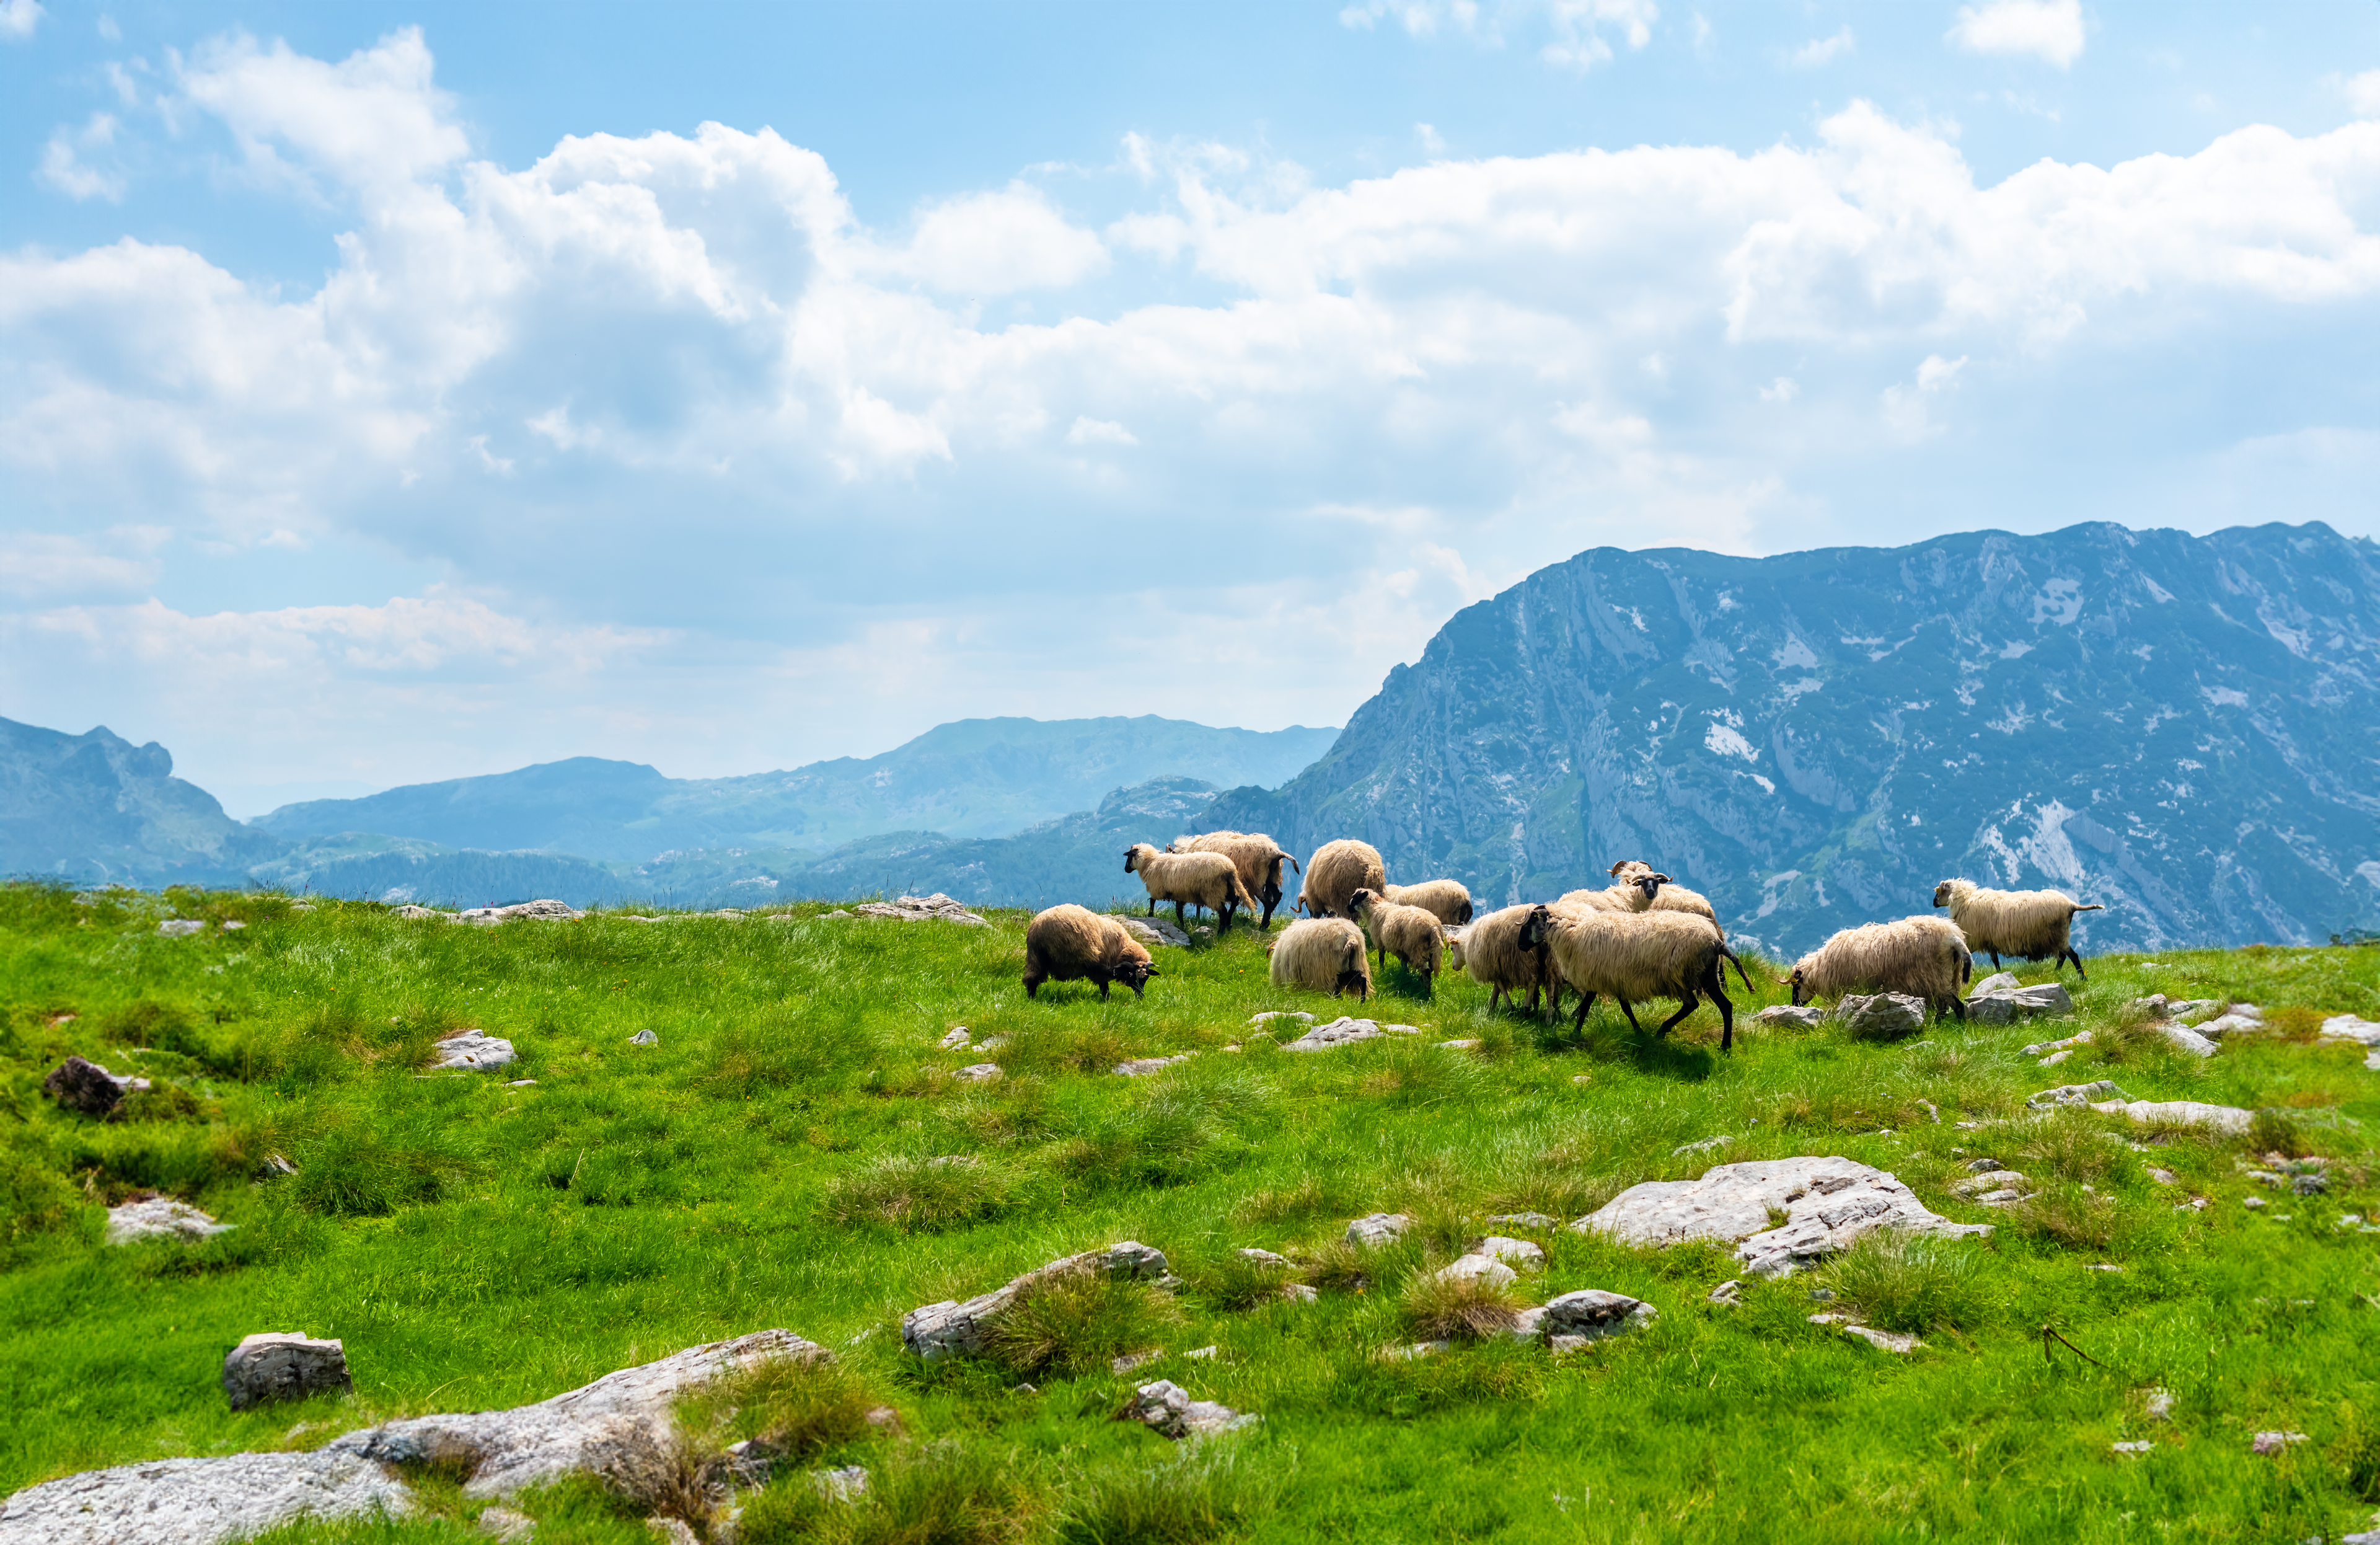 Image of a flock of sheep on a mountain country side.